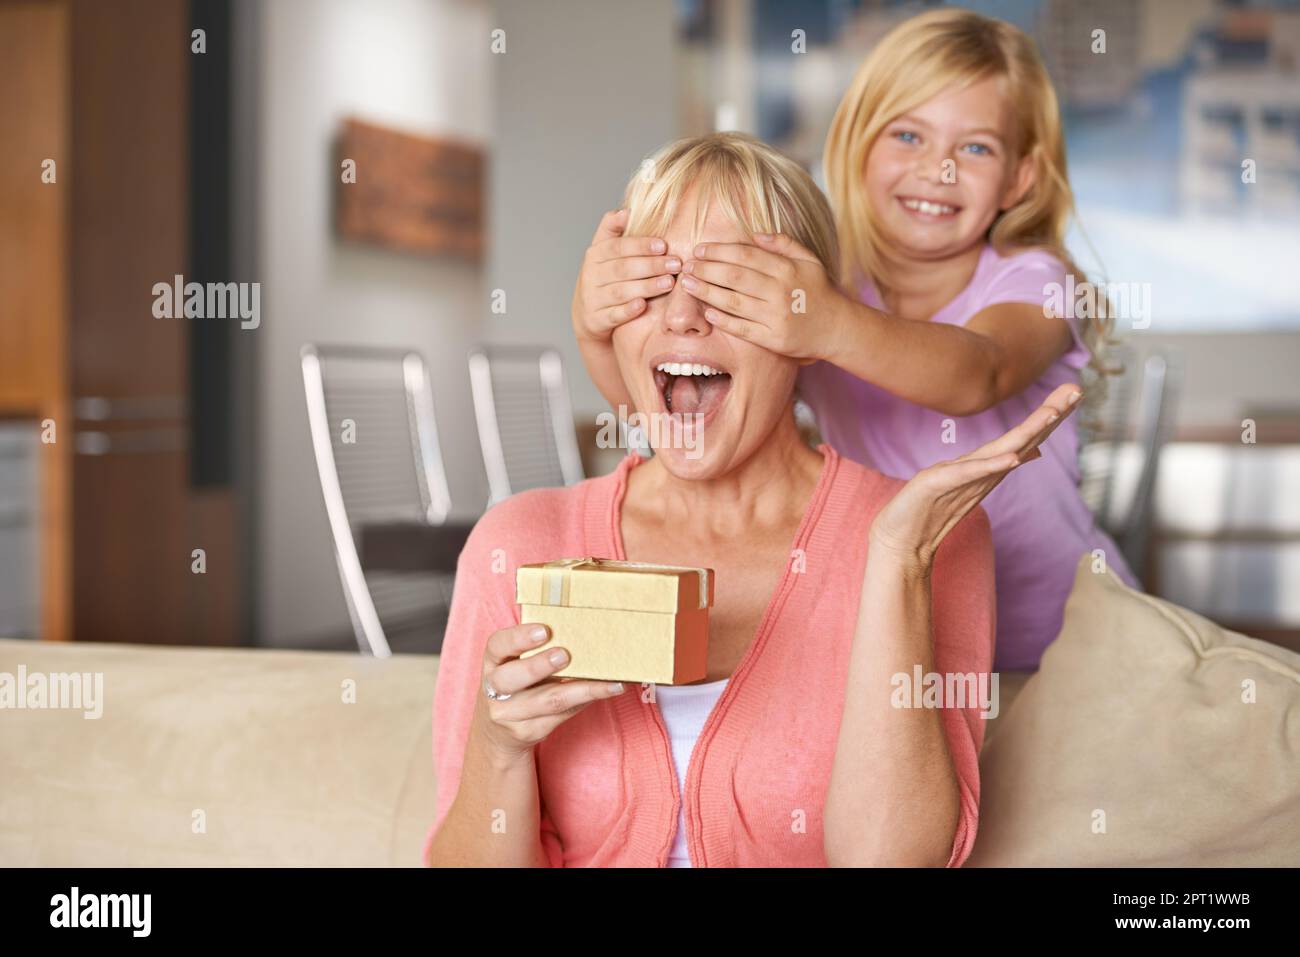 Open your hands and close your eyes for a big surprise. a young girl surprising her mother with a gift Stock Photo